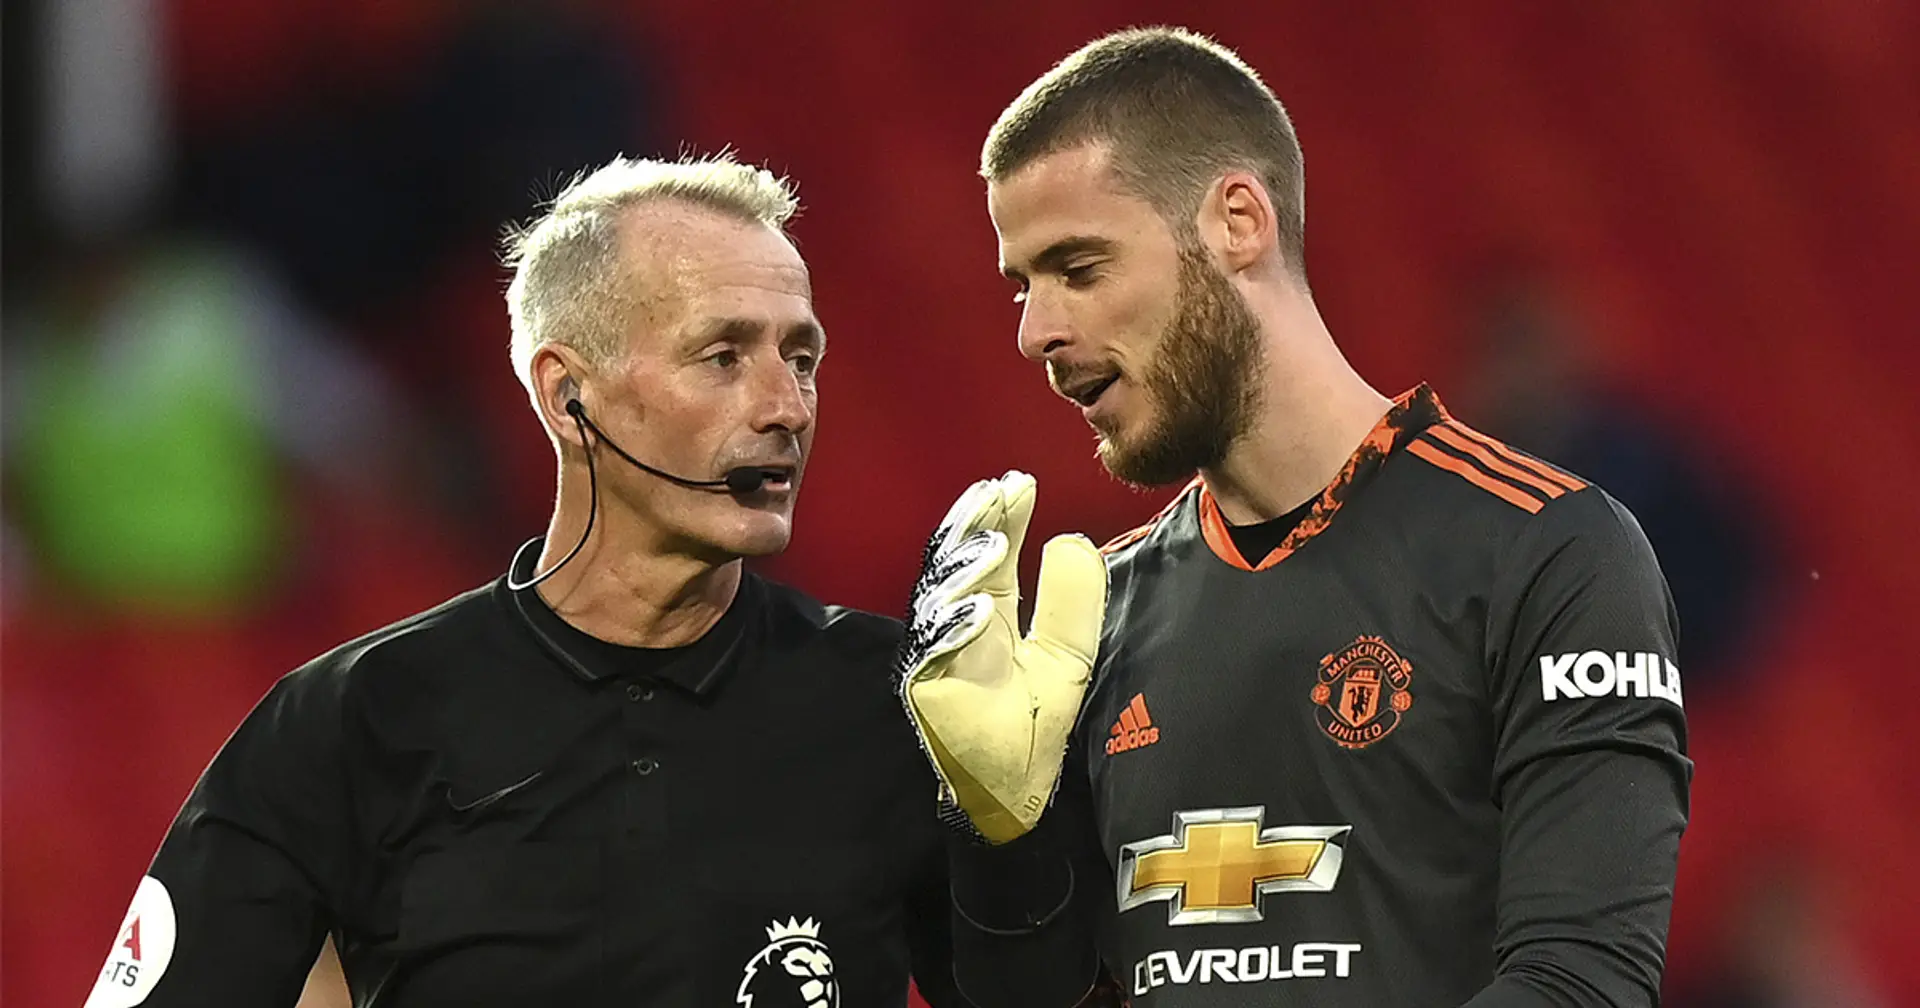 'Now we are even more limited': De Gea hits out at 2 new penalty rules